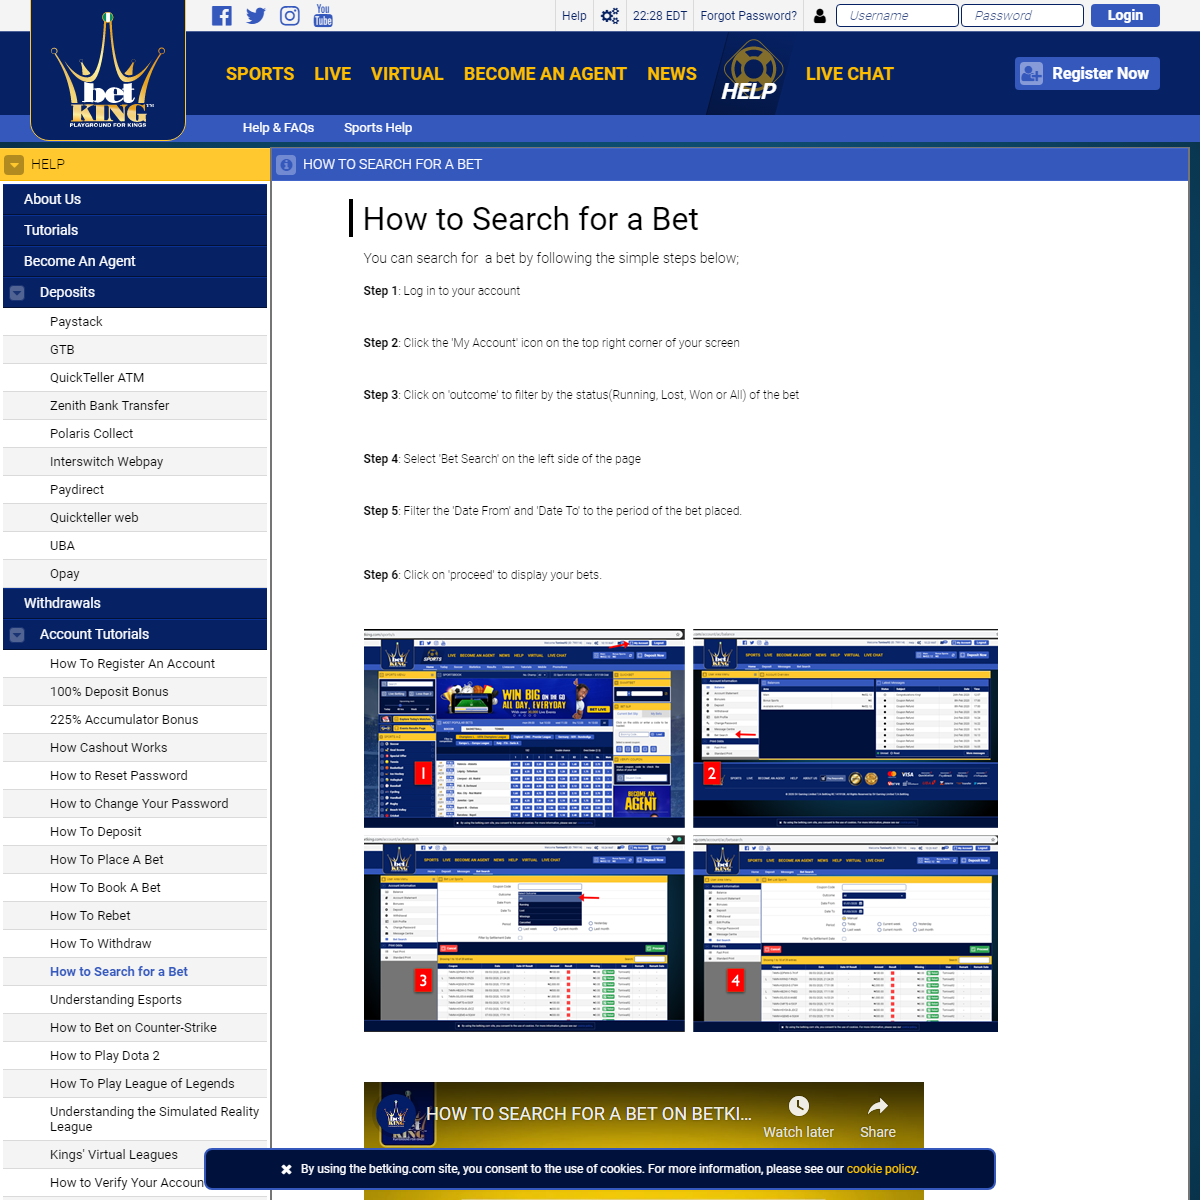 A complete backup of https://www.betking.com/help/general-help/account-tutorials/how-to-search-for-a-bet/